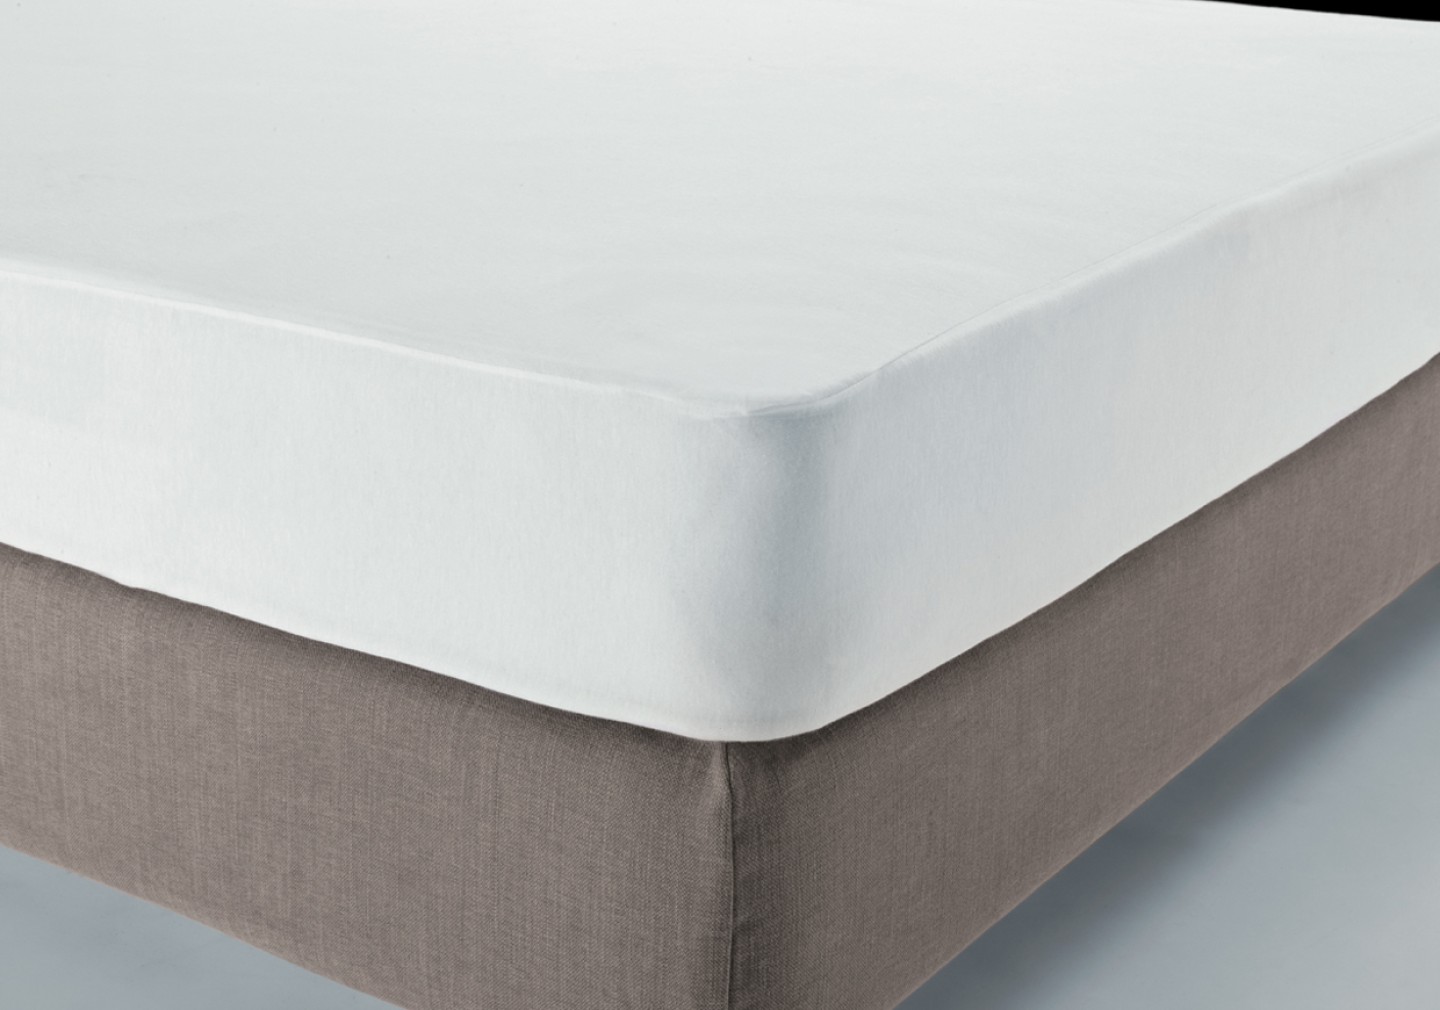 MATRESS PROTECTIVE COVER - Sealy White Cool